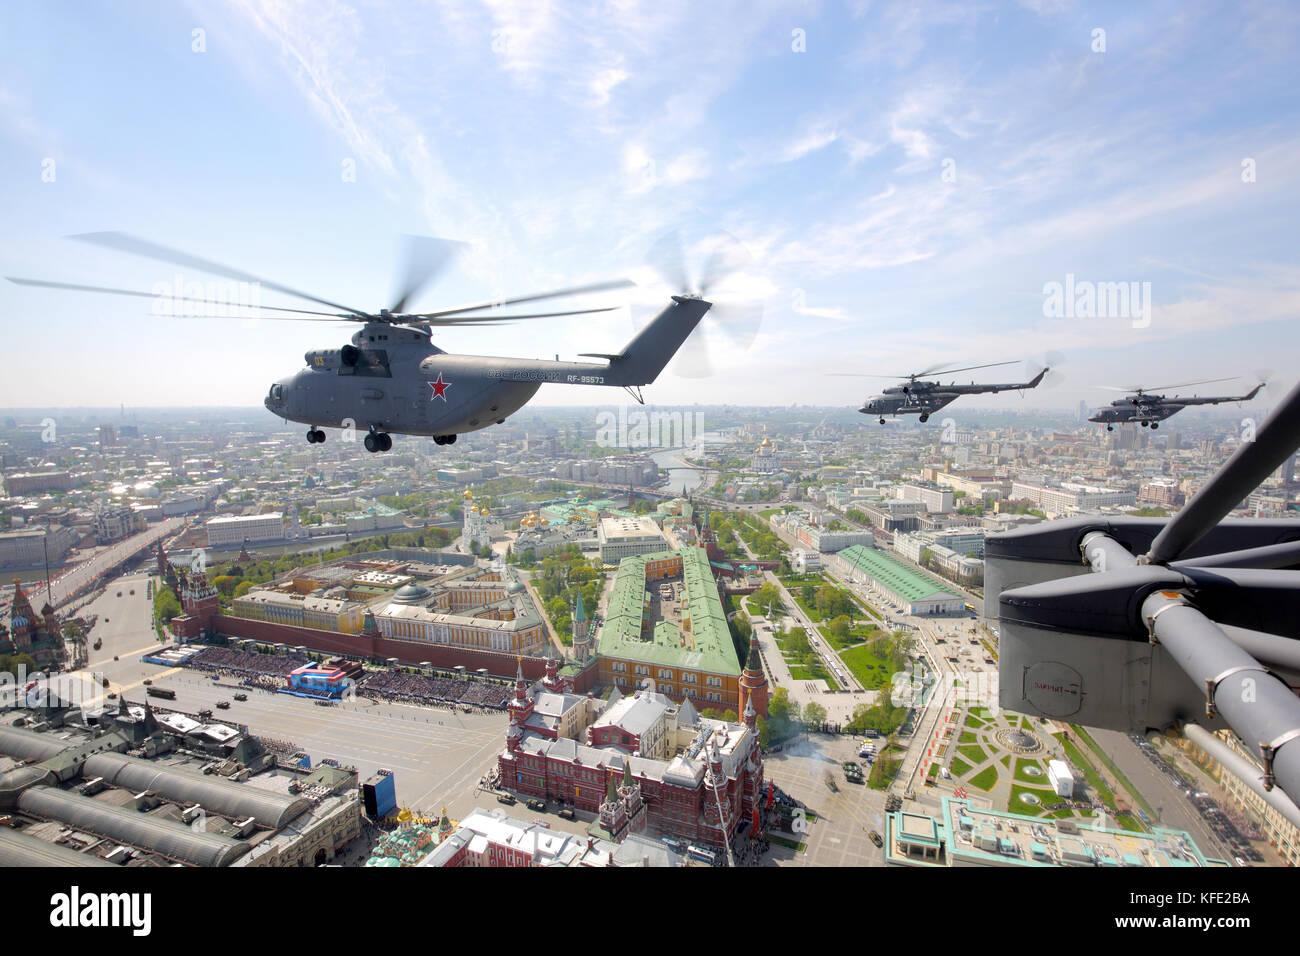 Red Square, Moscow, Russia - May 9, 2015: Mil Mi-26 and Mi-8 helicopters of Russian Air Force during Victory Day parade. Stock Photo